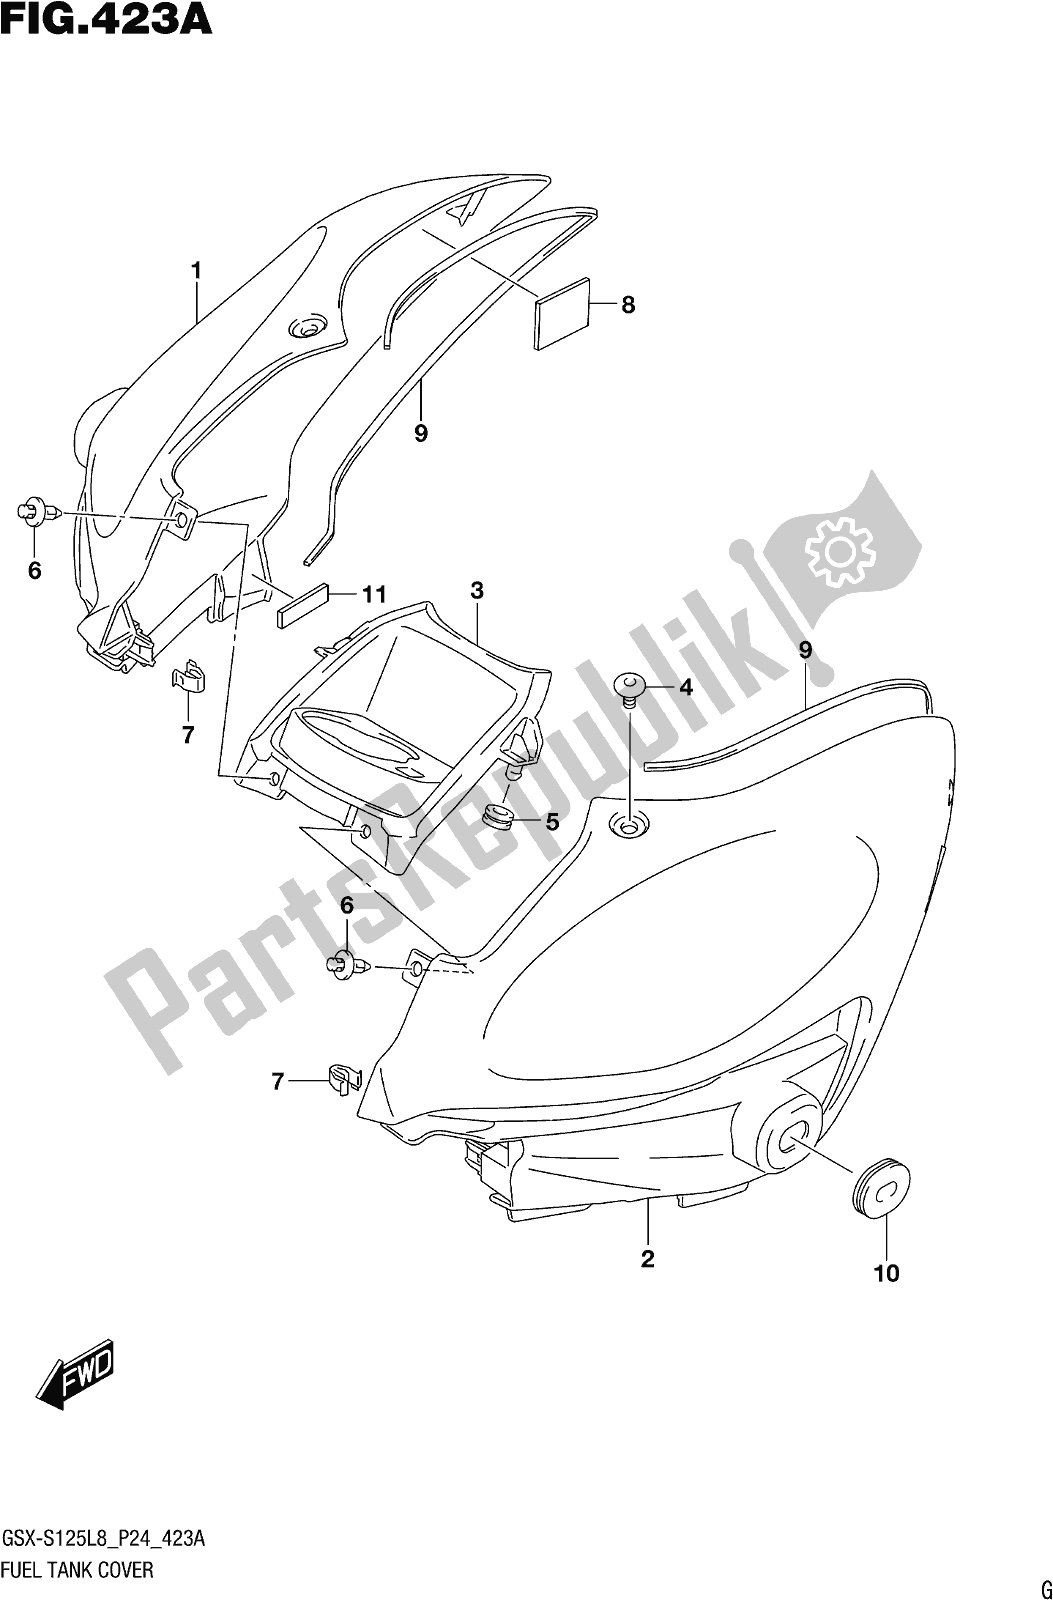 All parts for the Fig. 423a Fuel Tank Cover of the Suzuki Gsx-s 125 MLX 2018